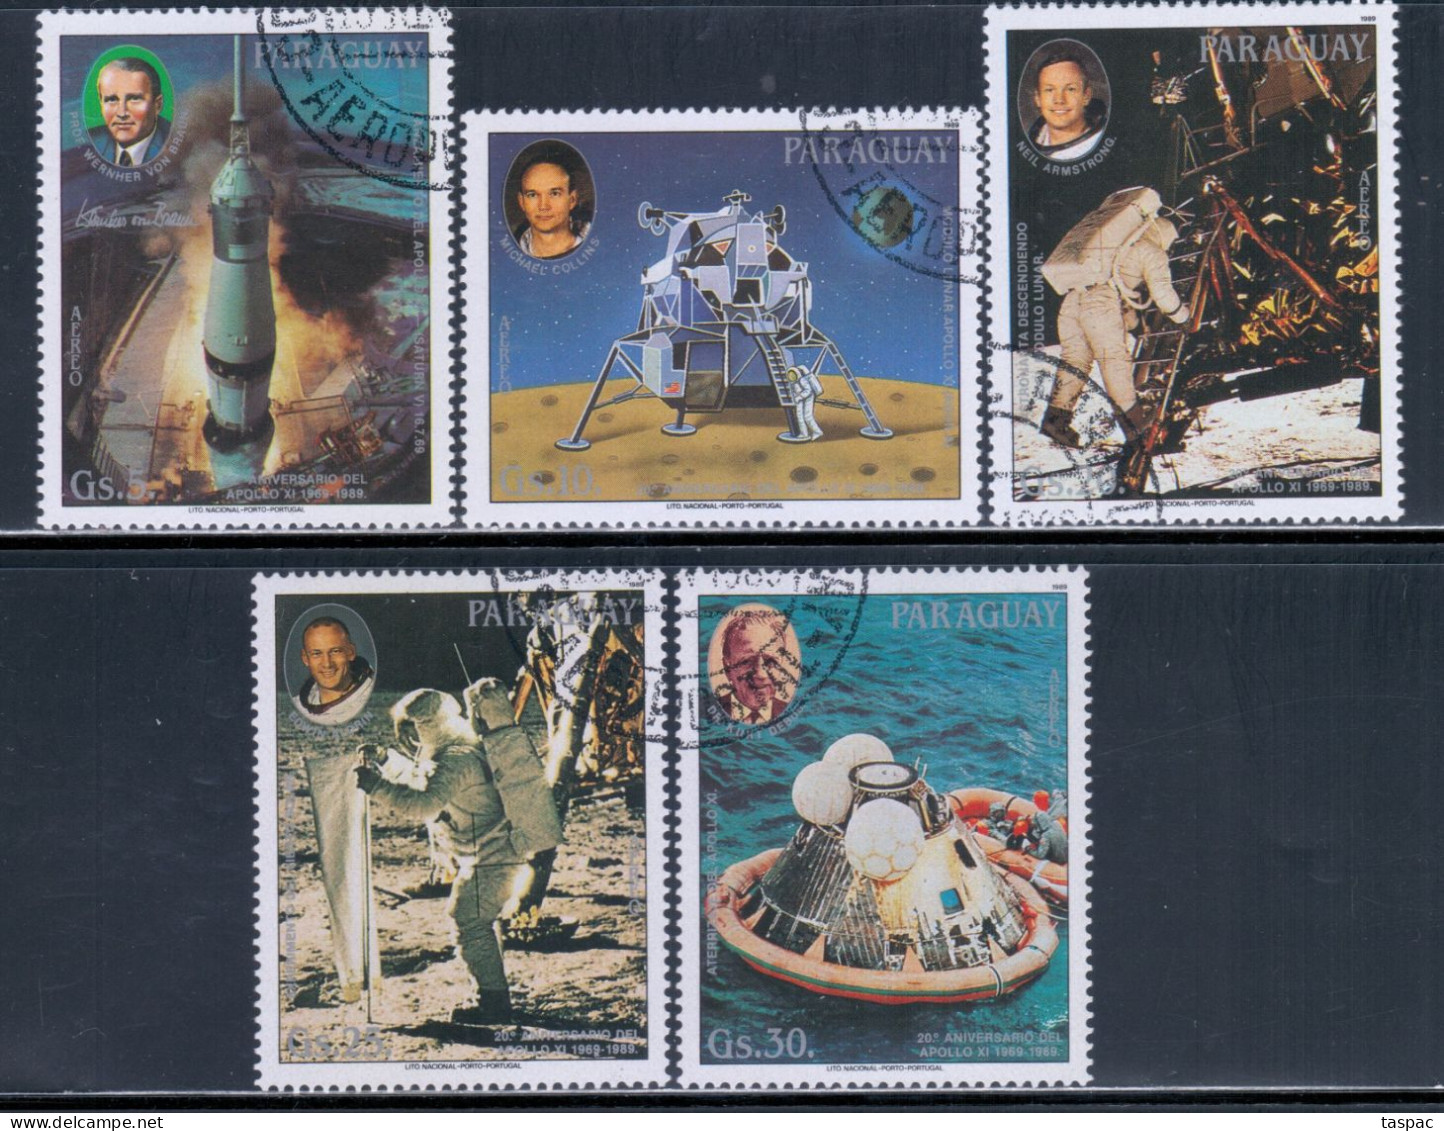 Paraguay 1989 Mi# 4328-4332 Used - 1st Moon Landing, 20th Anniv. / Space - South America